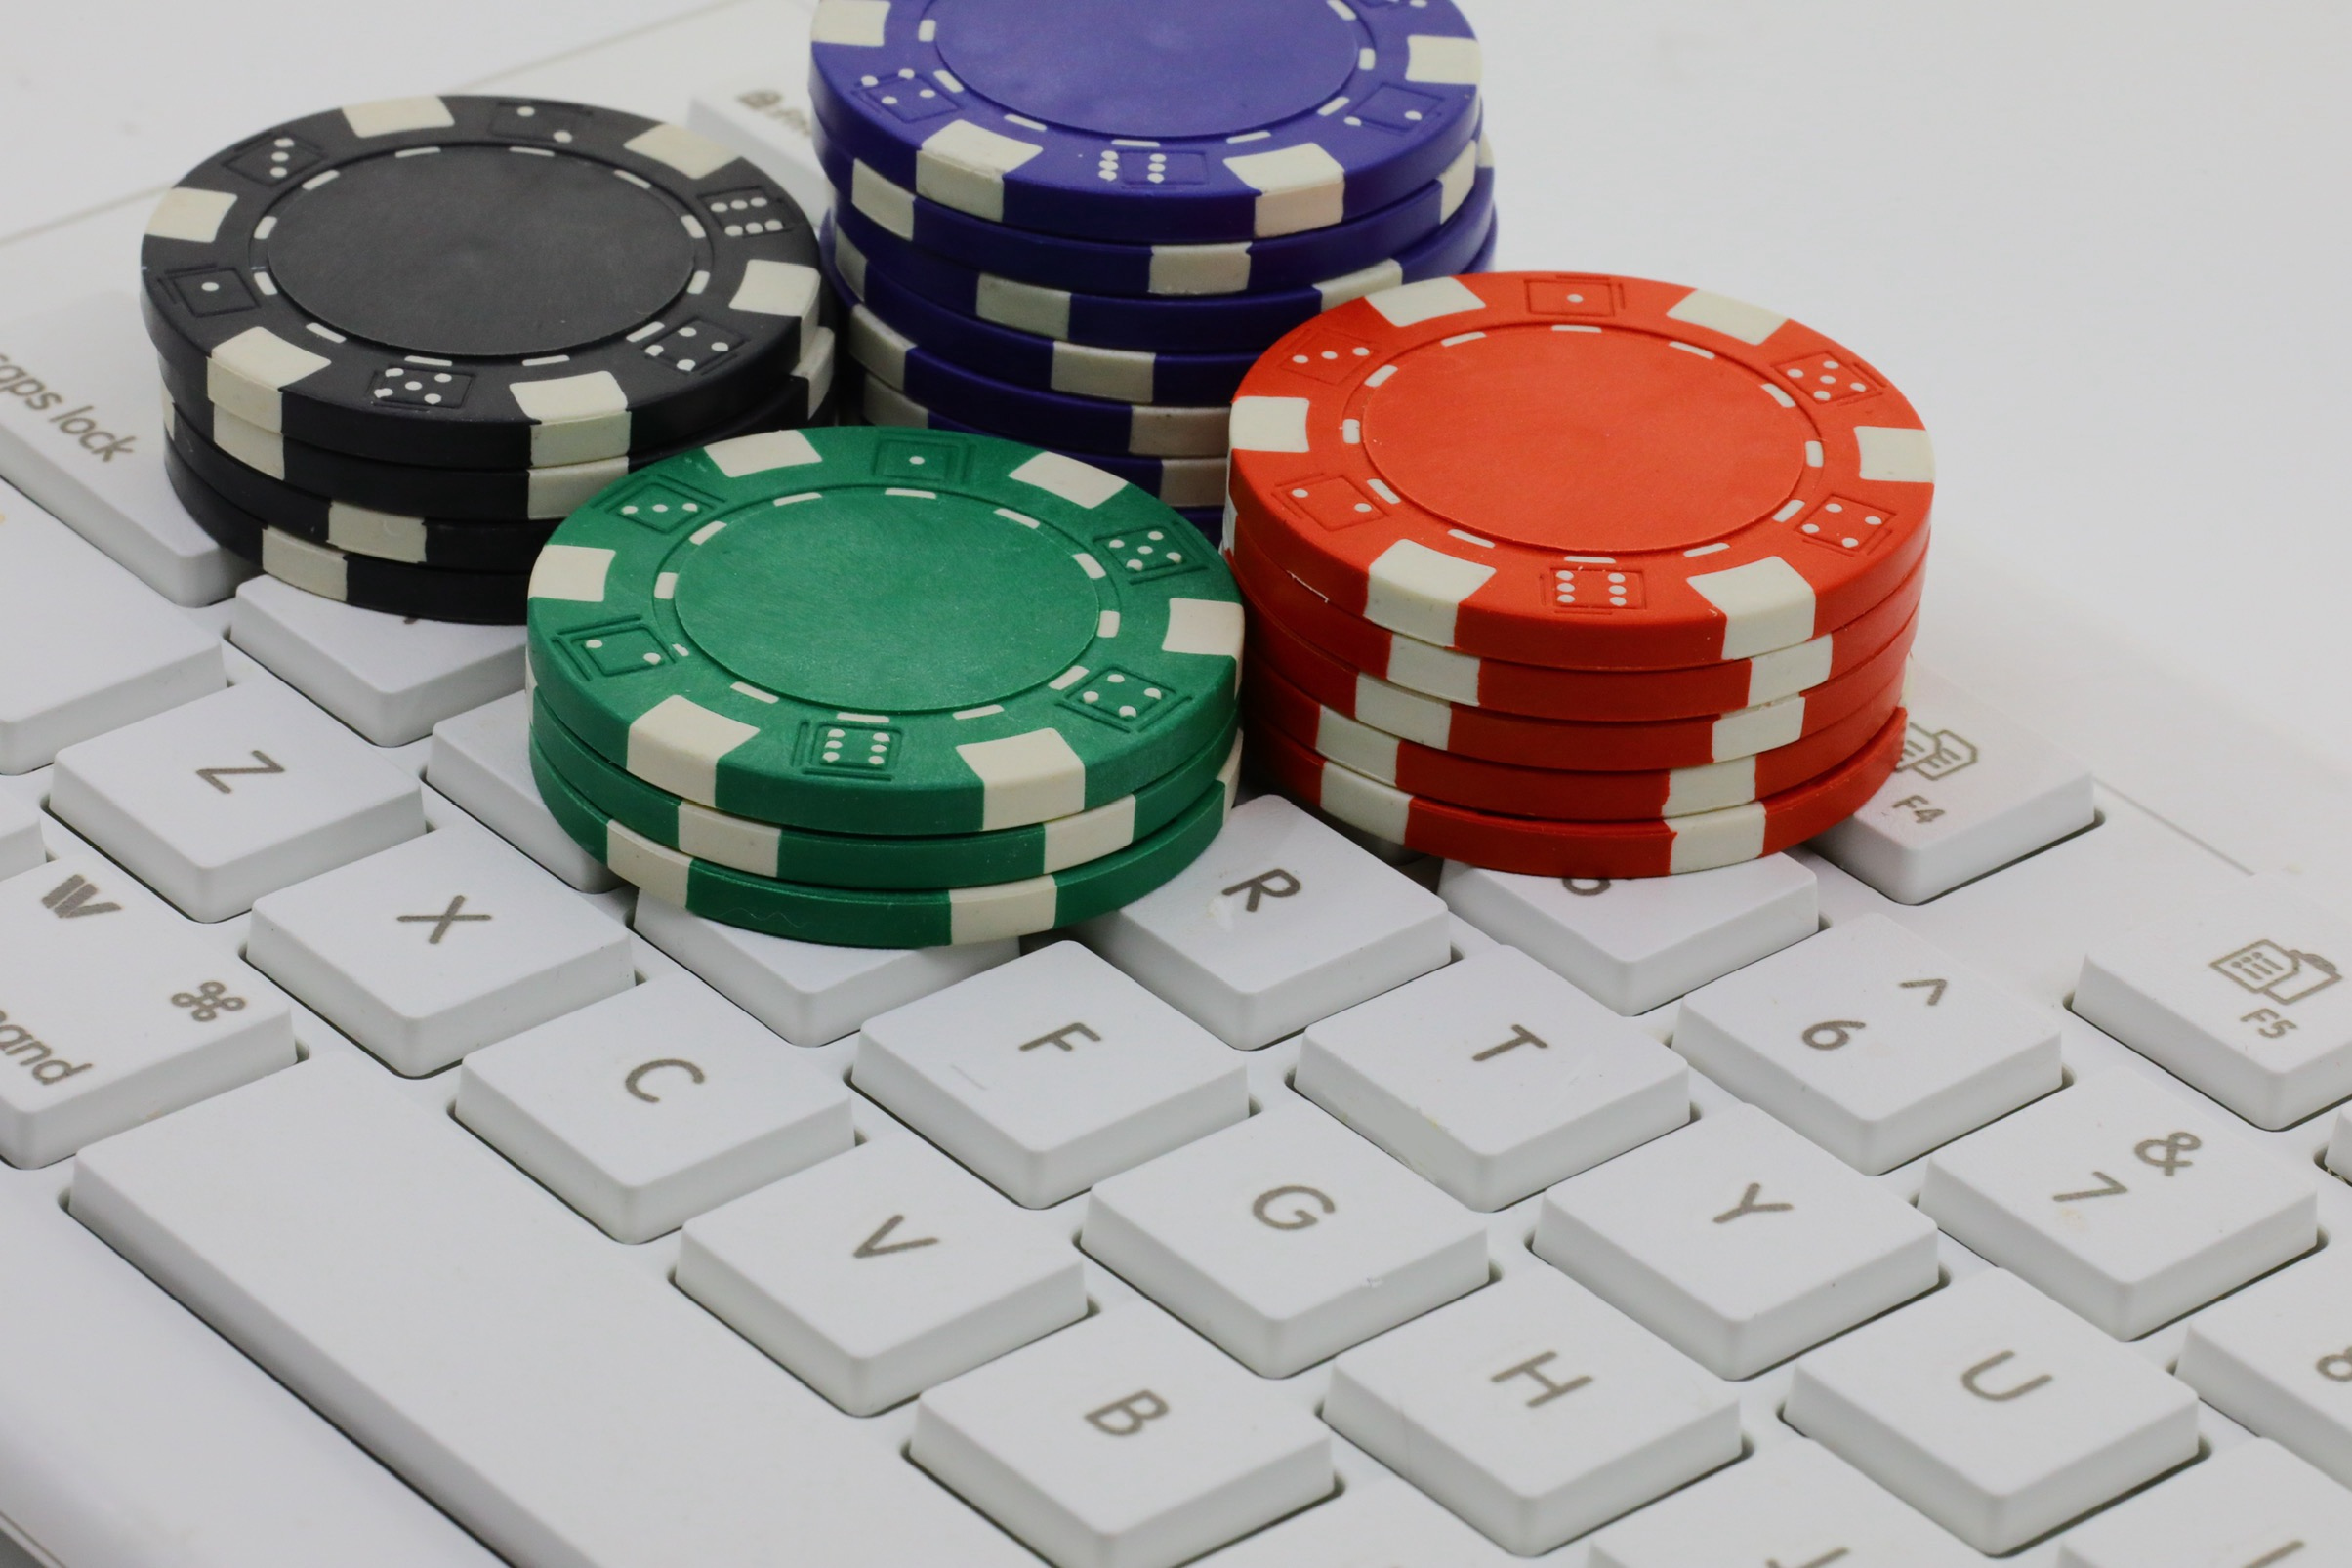 9 Easy Ways To Evolution of Online Gambling in India Without Even Thinking About It